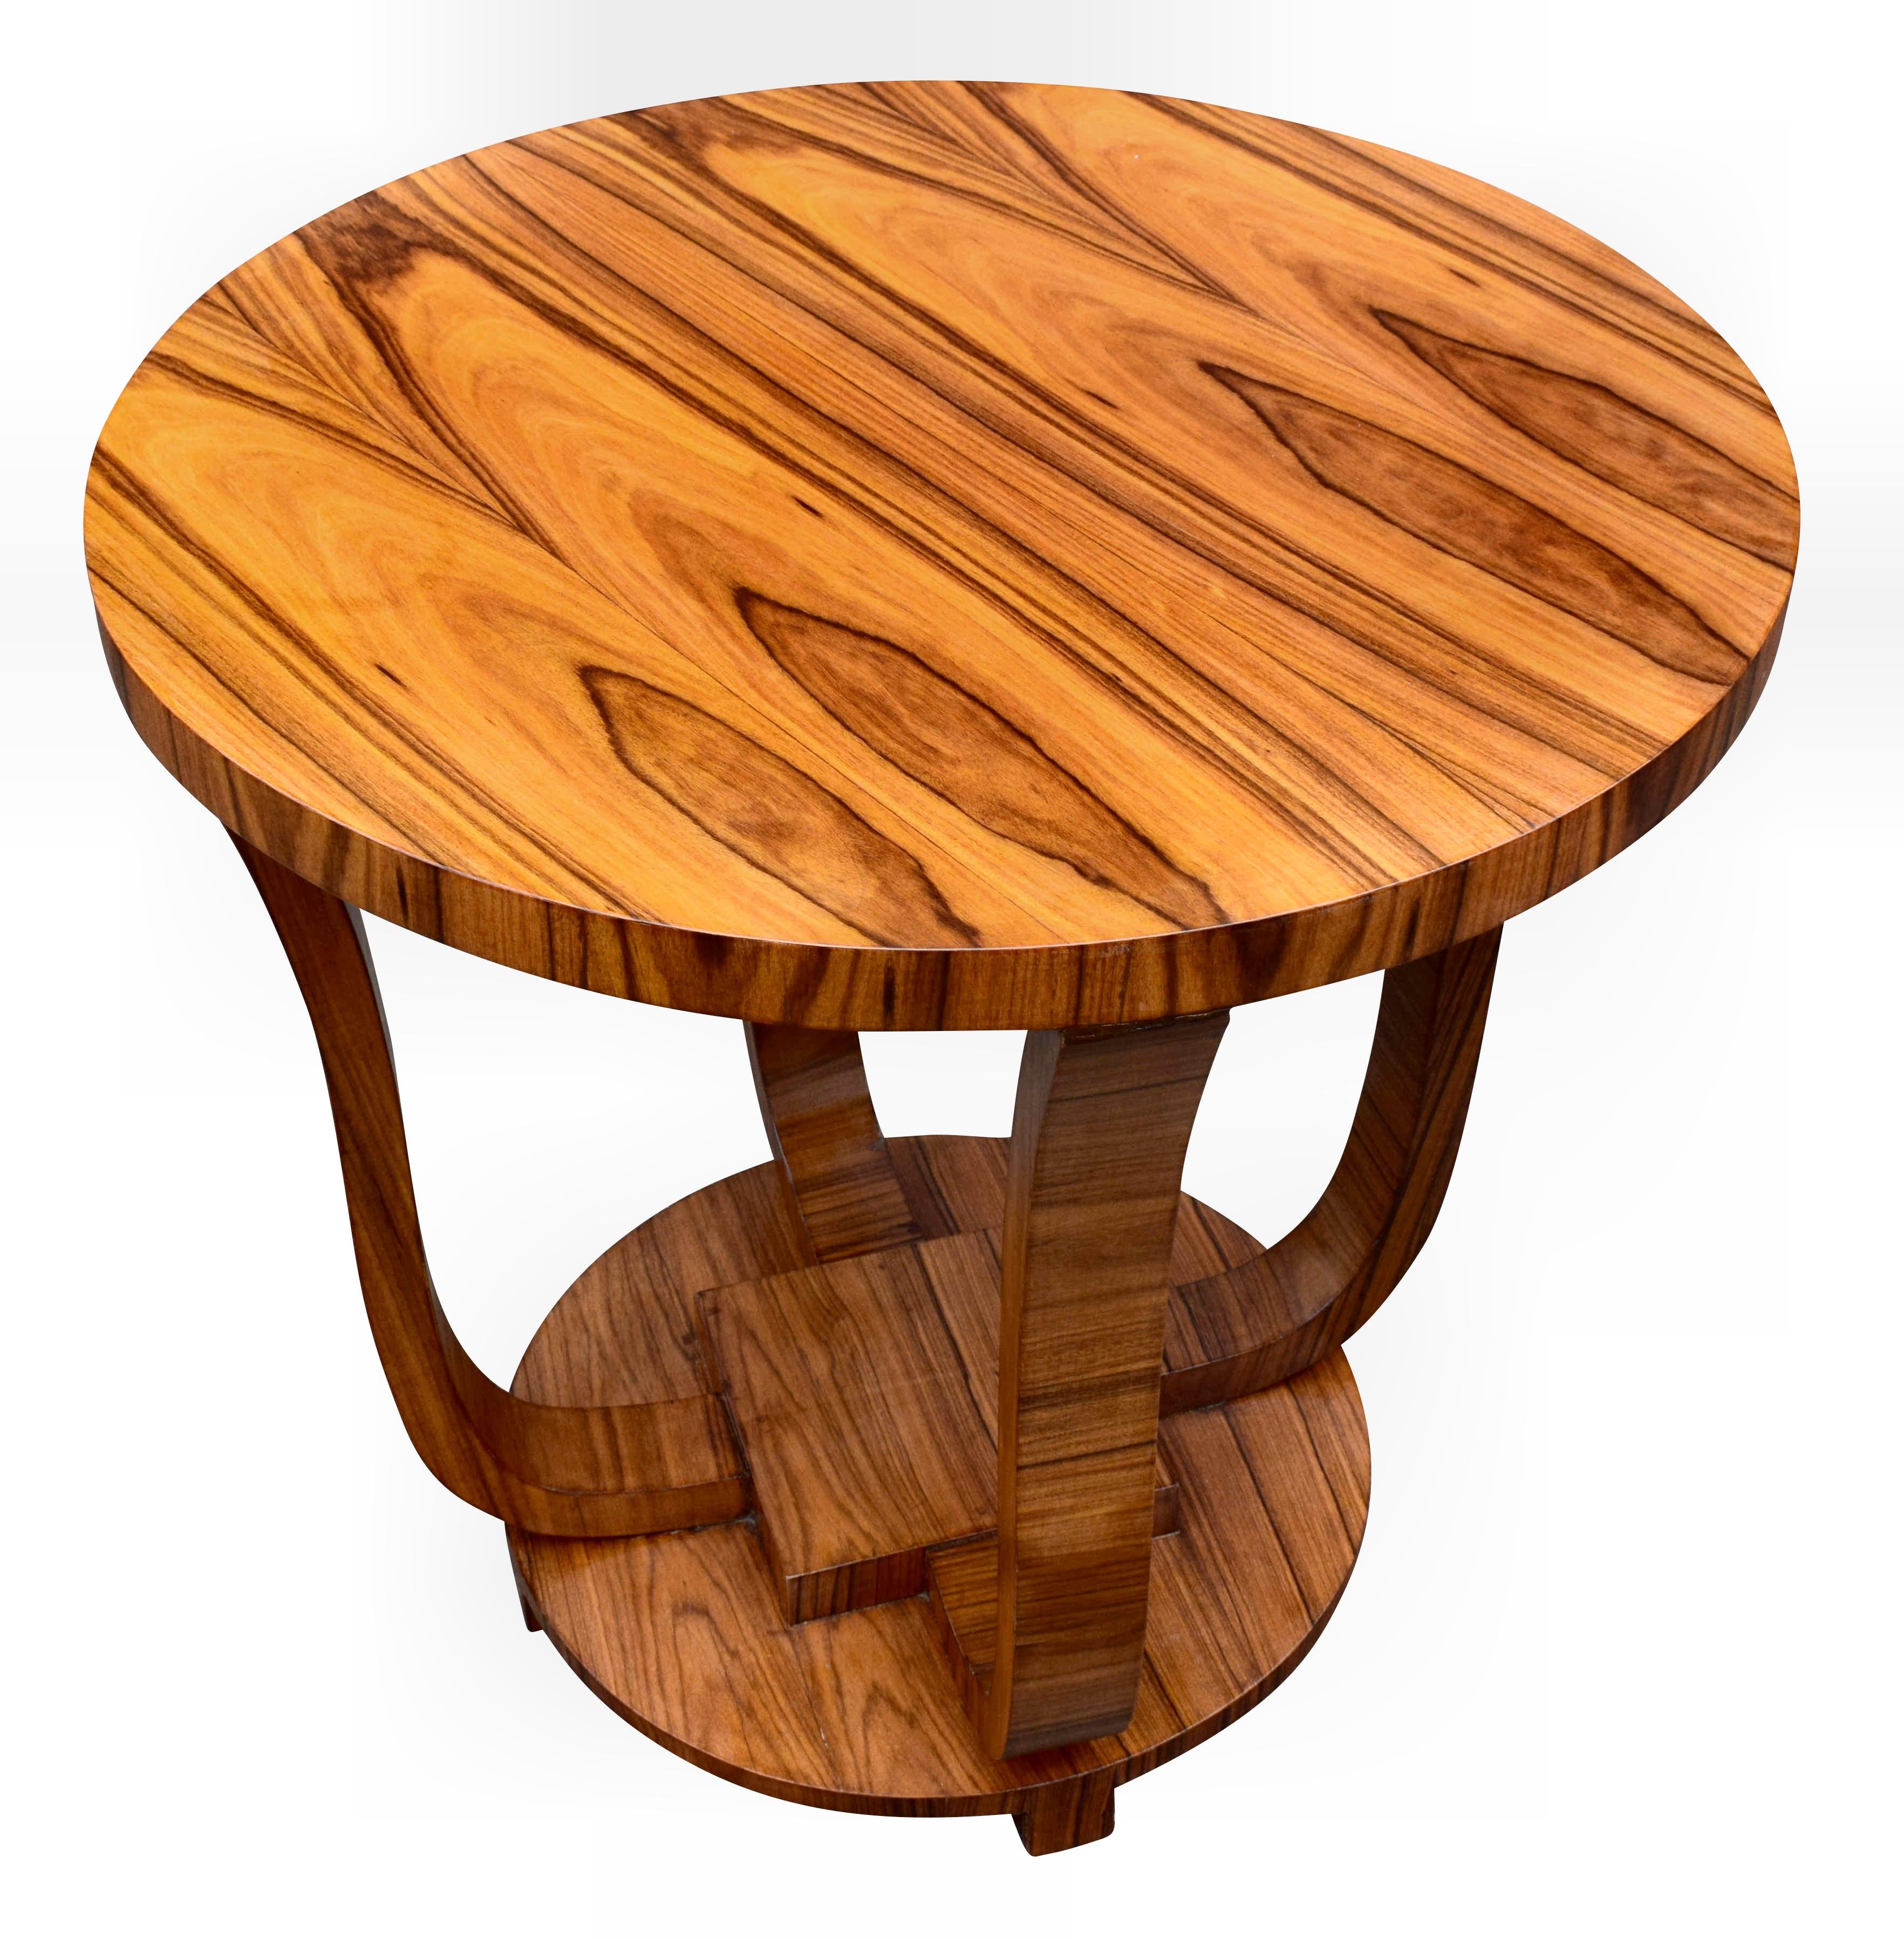 Very stylish and totally authentic English Art Deco walnut centre table dating to the 1930s. This table is beautifully shaped and fully restored to showroom condition. Typically larger than occasional coffee tables, these make ideal pieces to make a